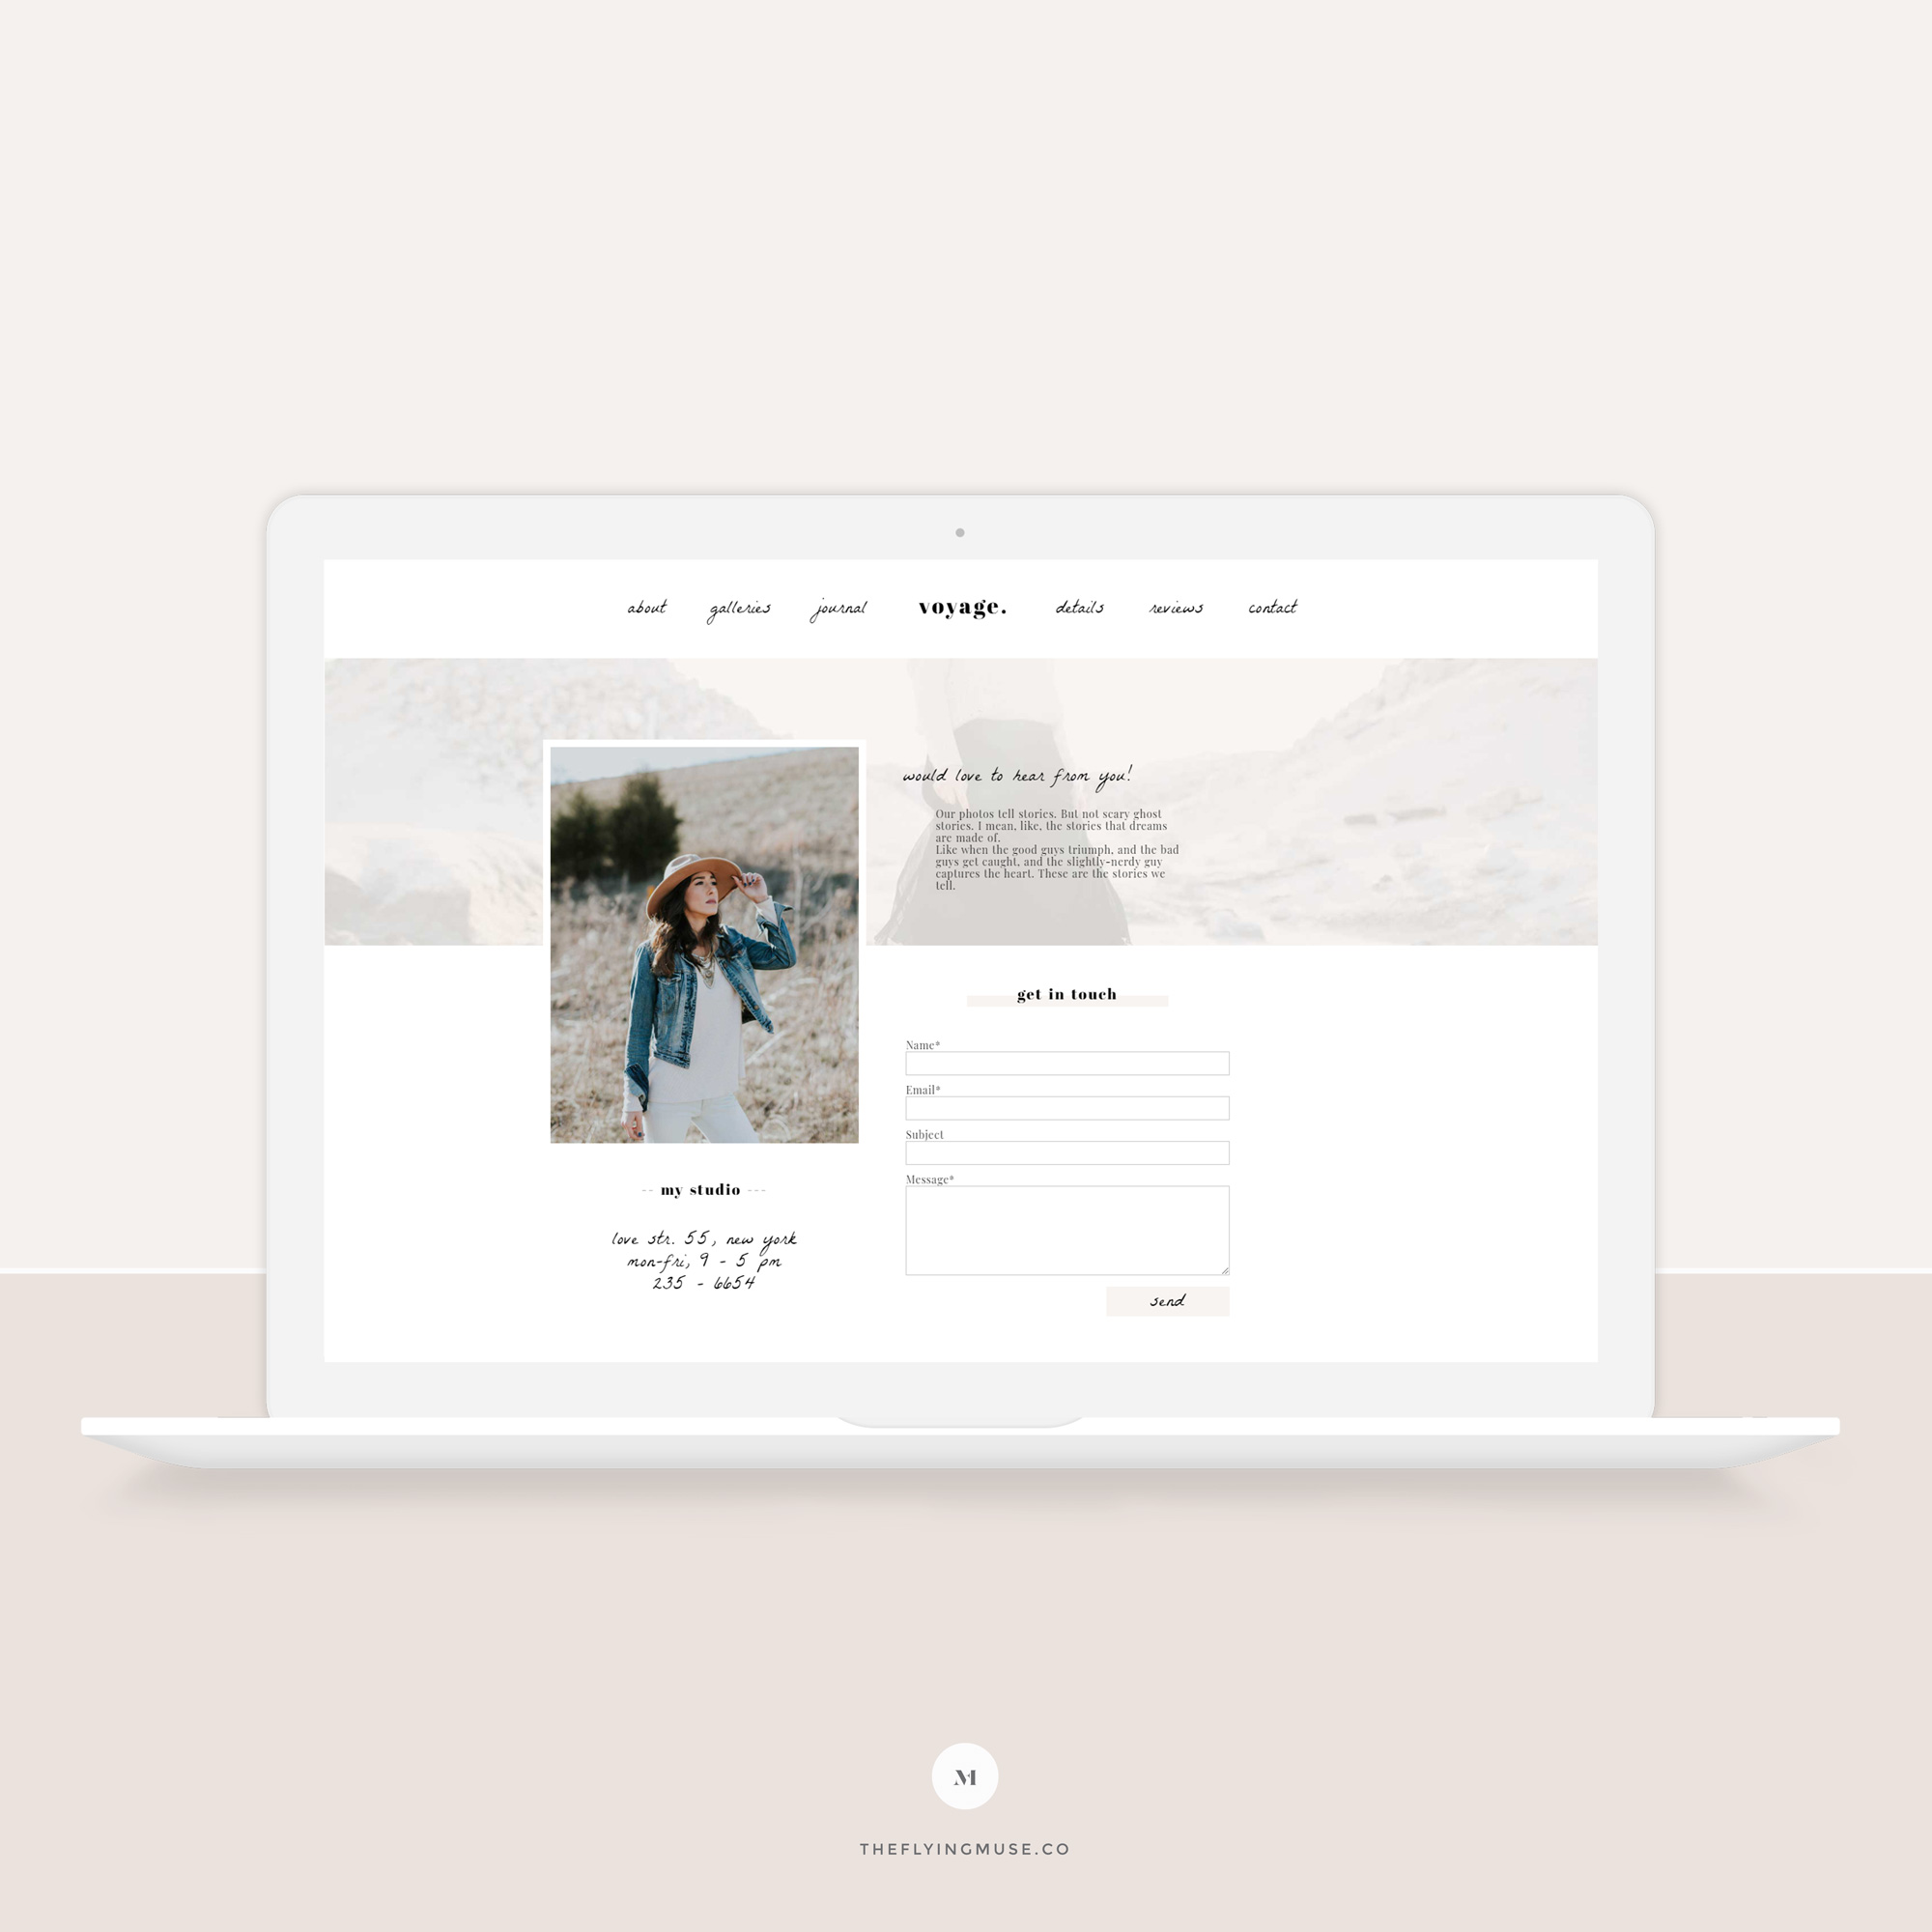 A lead capture form from the Voyage ProPhoto 7 template design